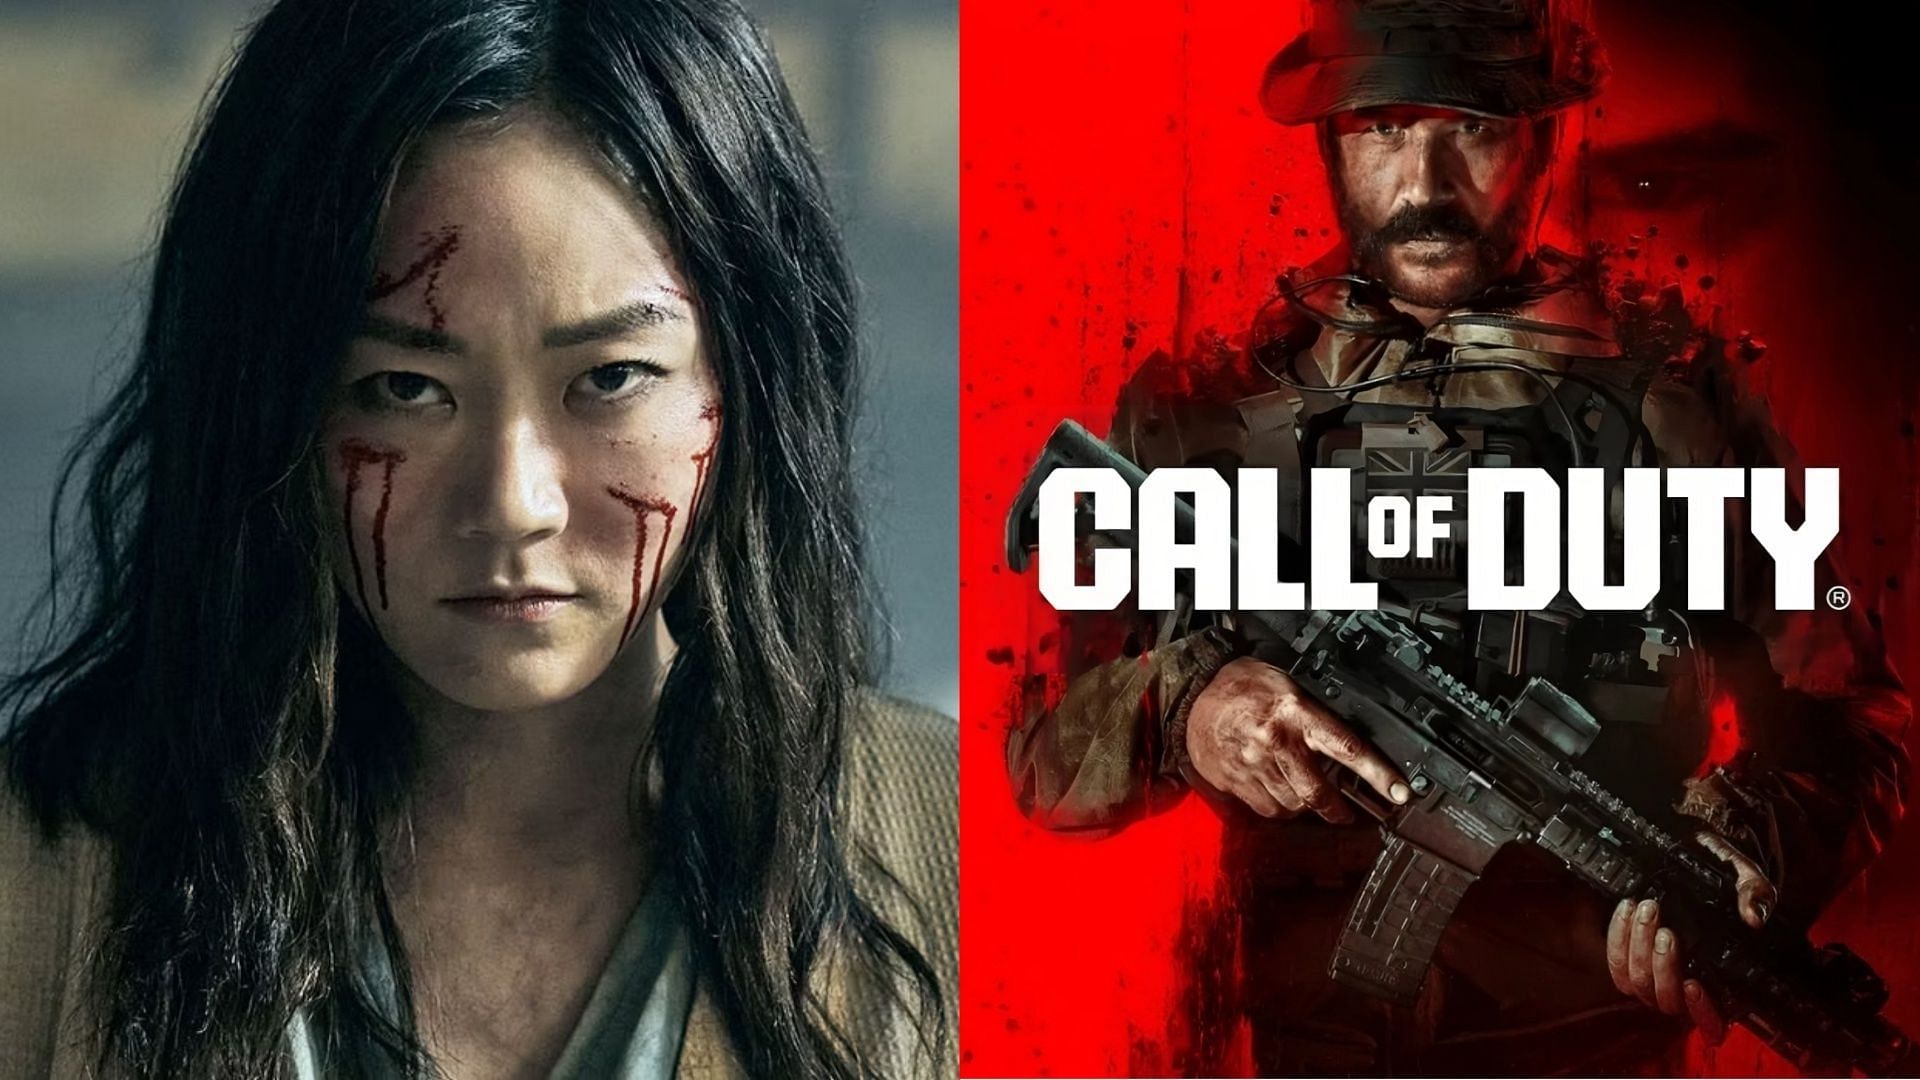 Kimiko from The Boys on the right and Captain Price from Call of Duty on the left